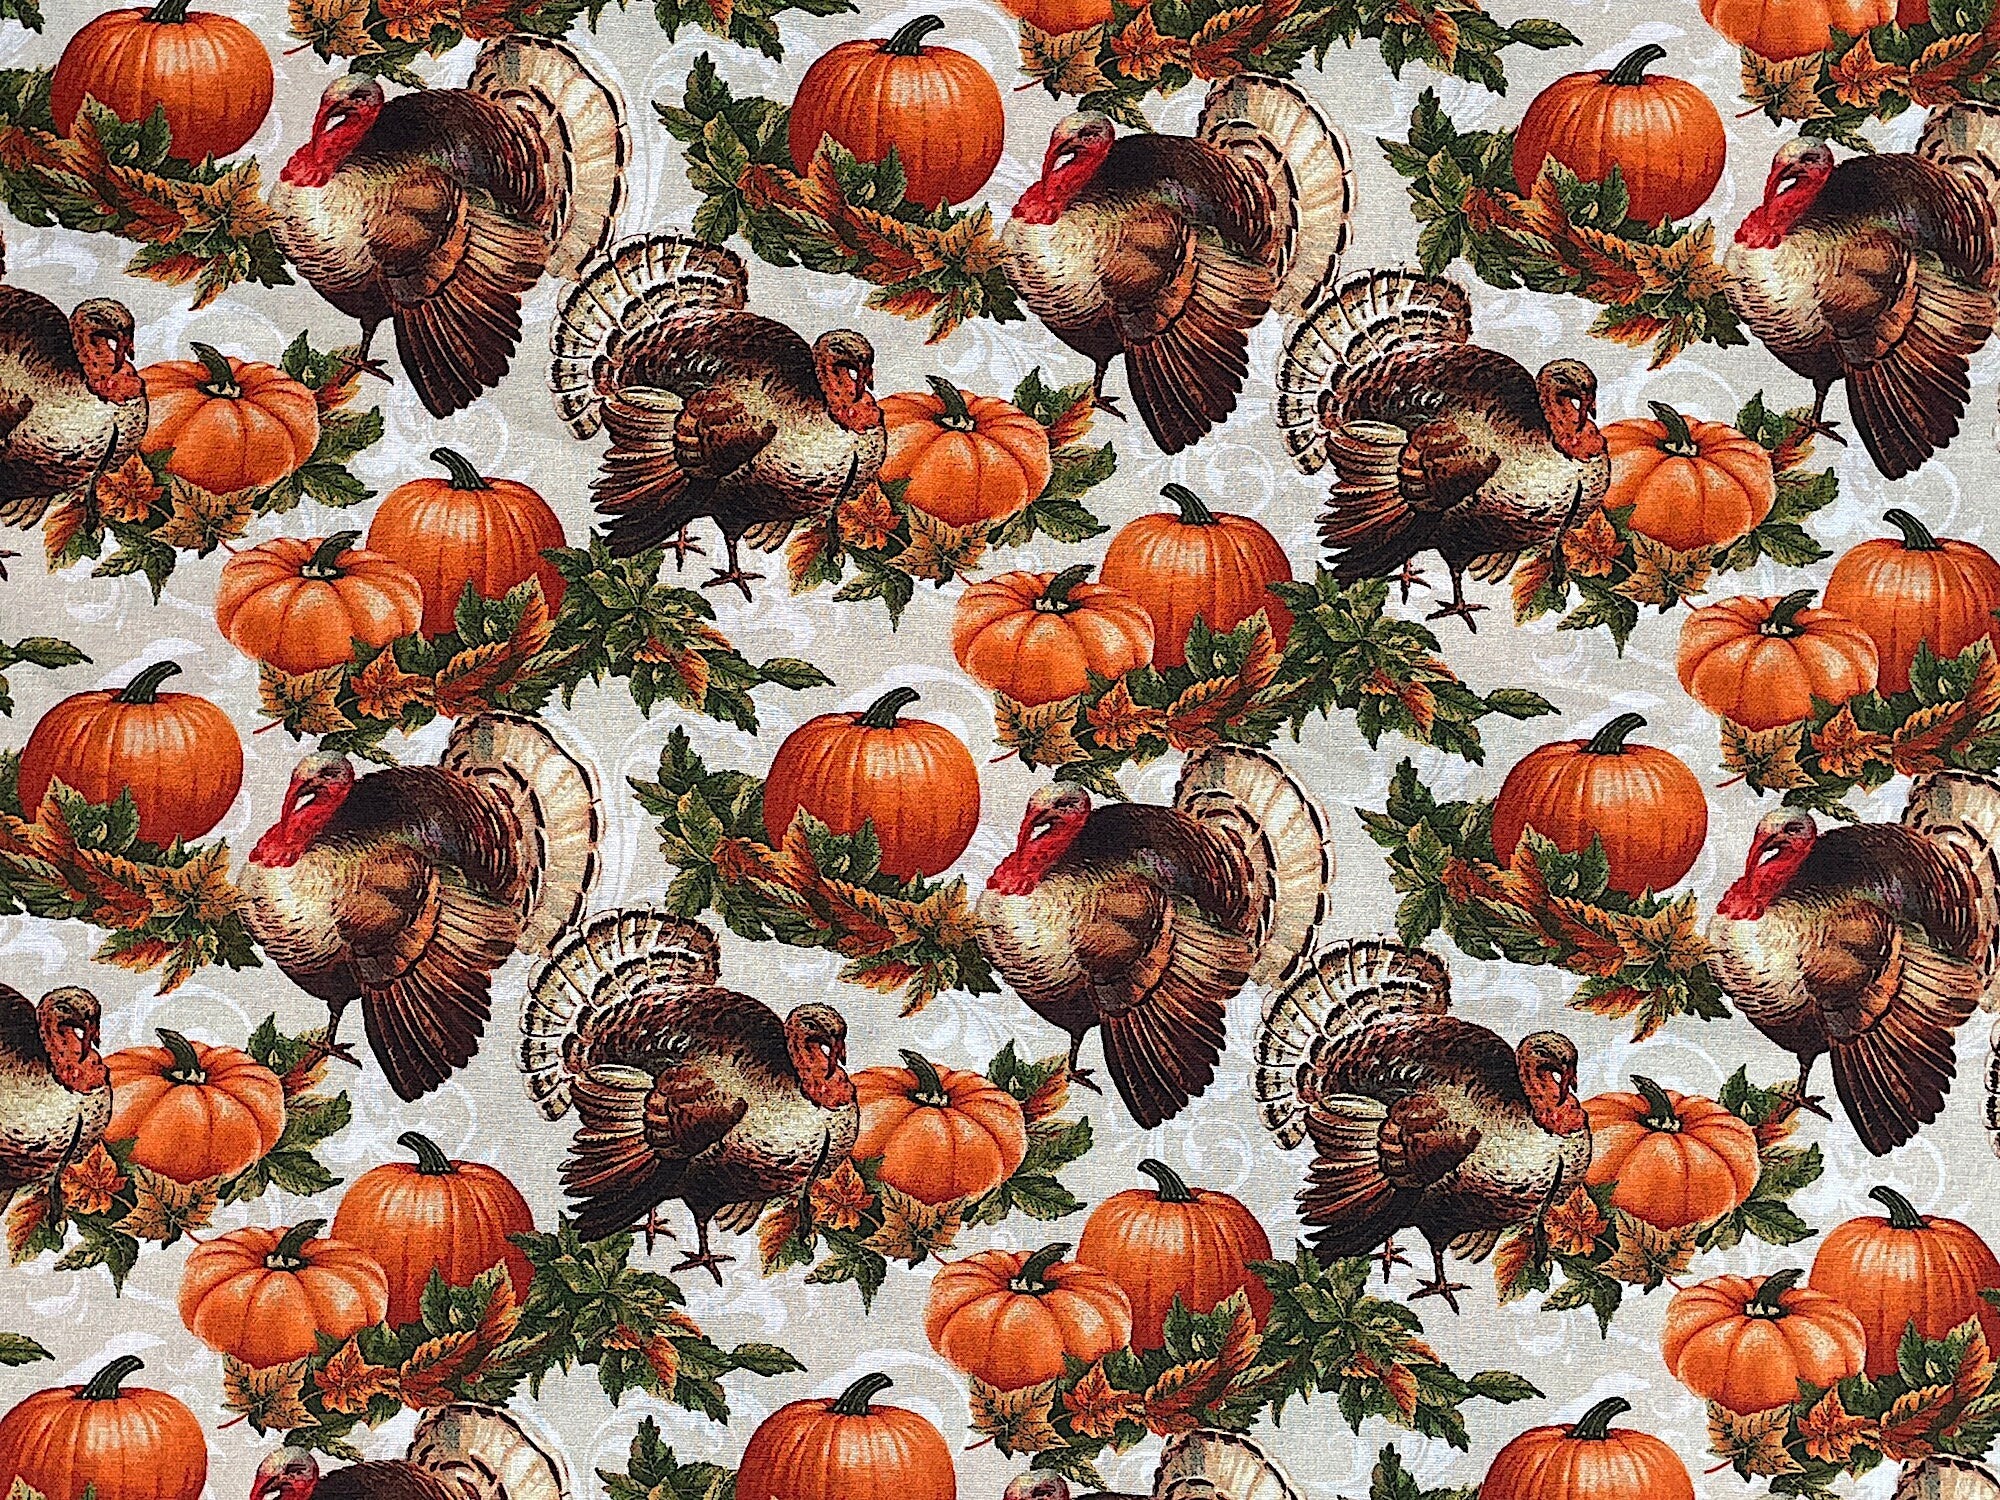 This cotton fabric is covered with turkeys and orange pumpkins. This fabric is part of the Turkey Time collection by Benartex